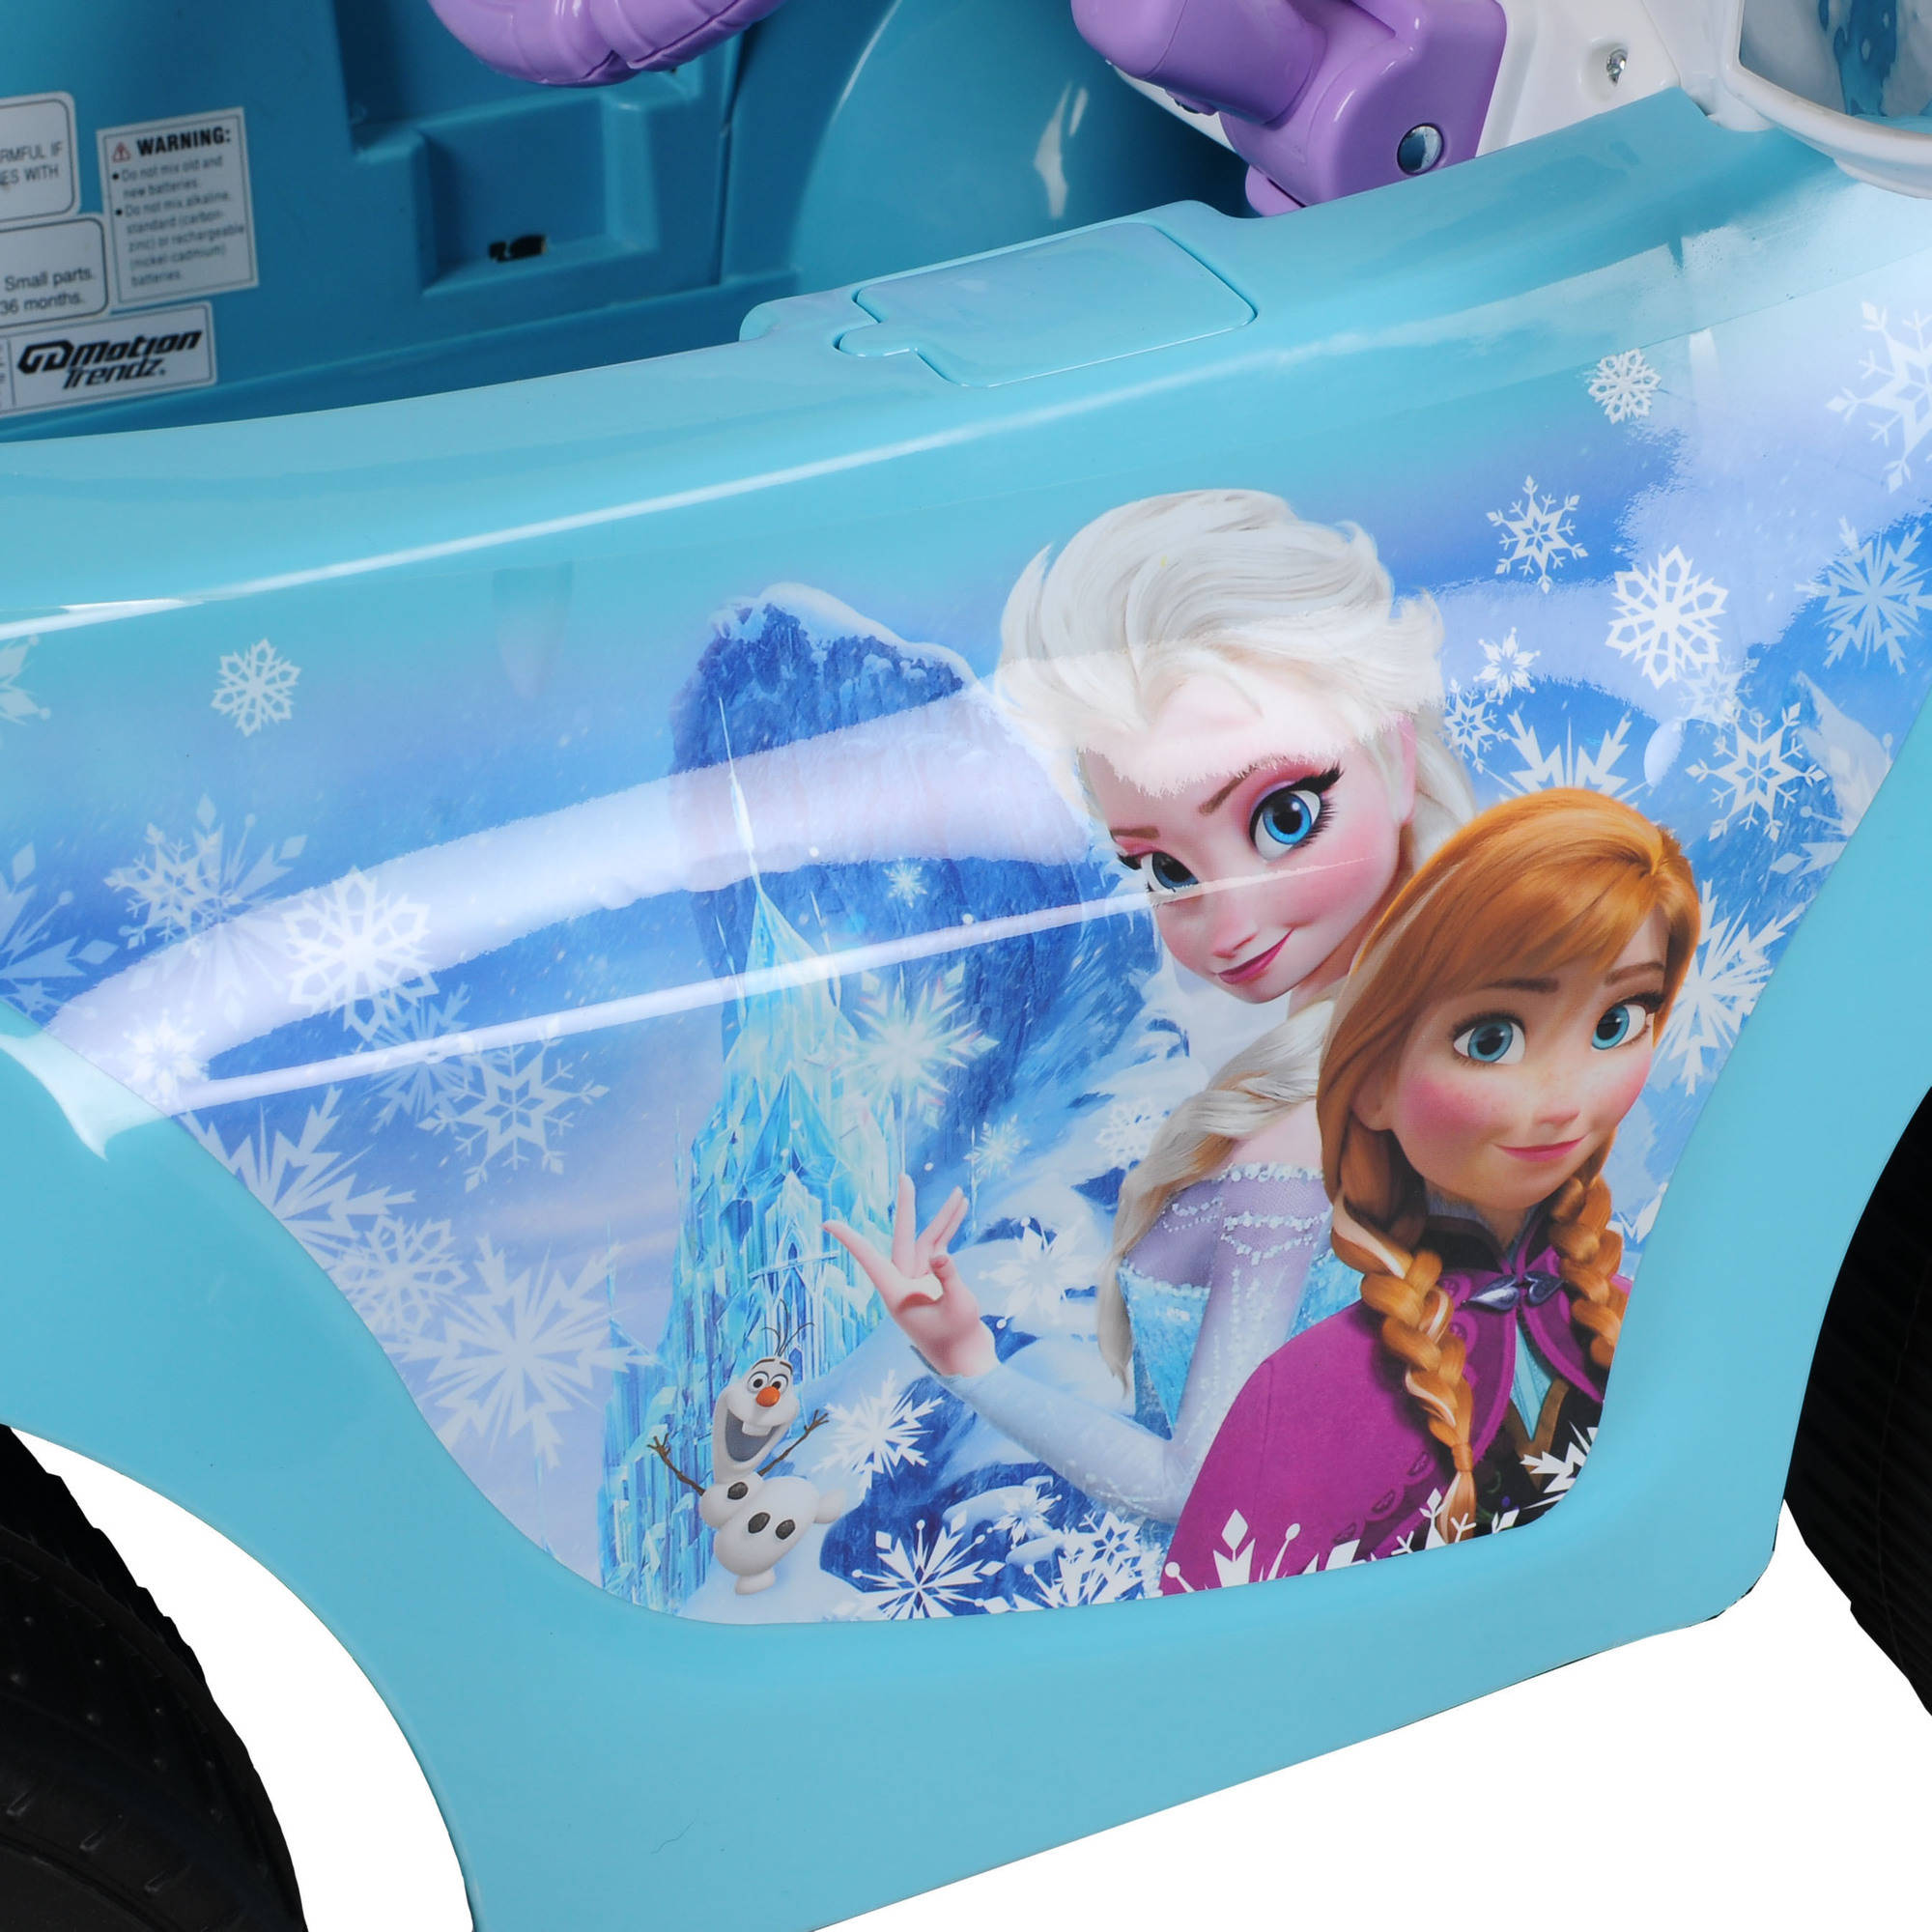 Disney Frozen Convertible Car 6-Volt Battery-Powered Ride-On - image 4 of 7